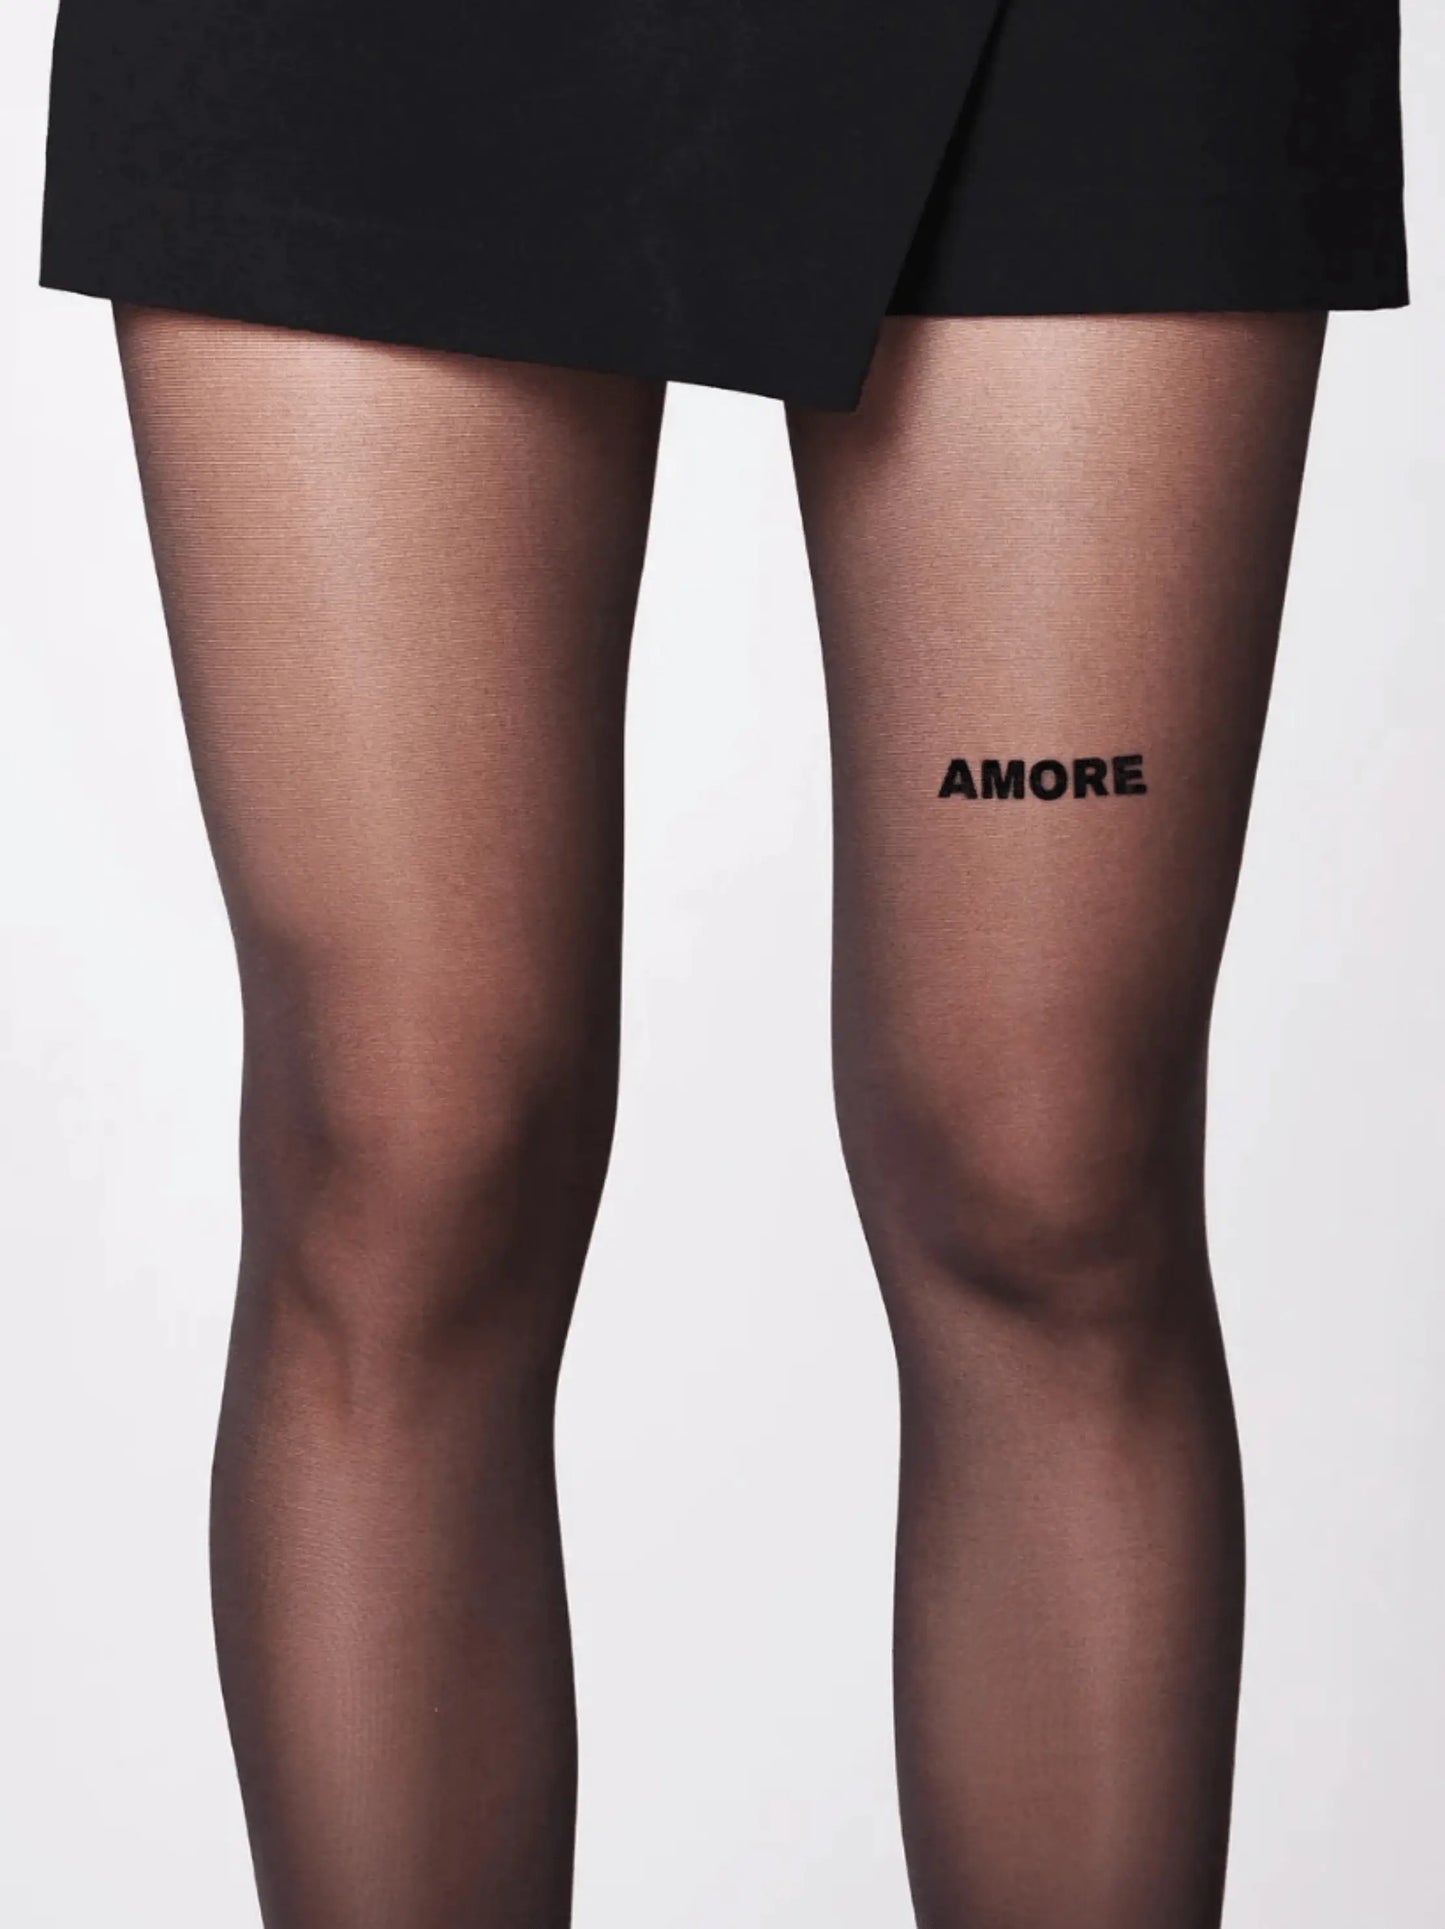 Amore Tights